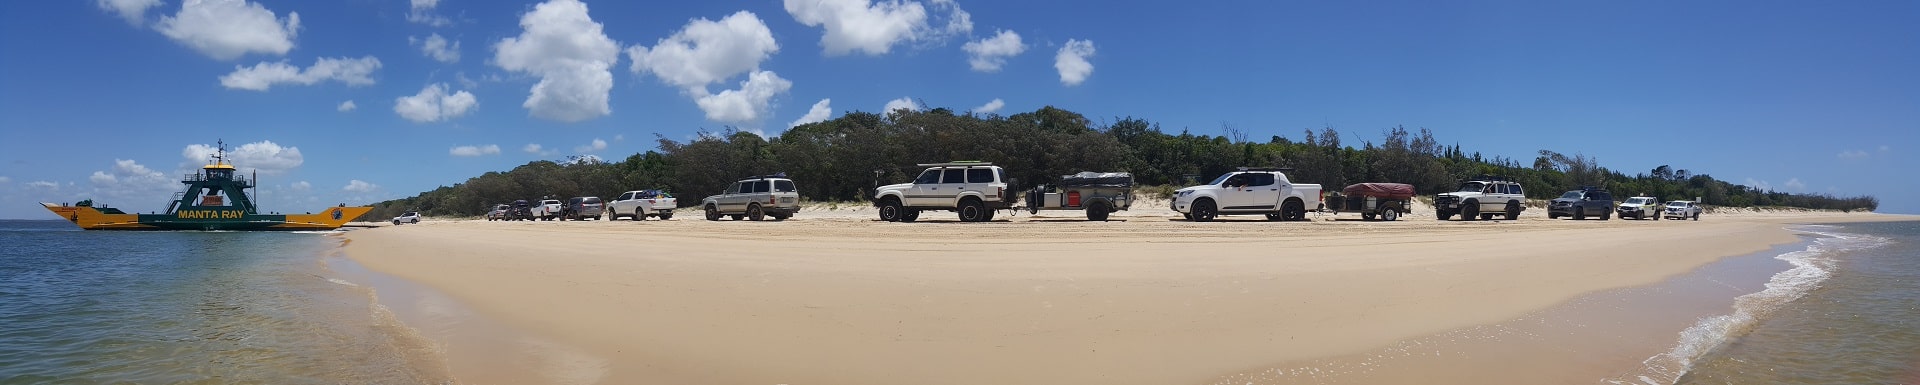 Fraser Island Cleanup, four wheel drives lined up on the beach to board the barge